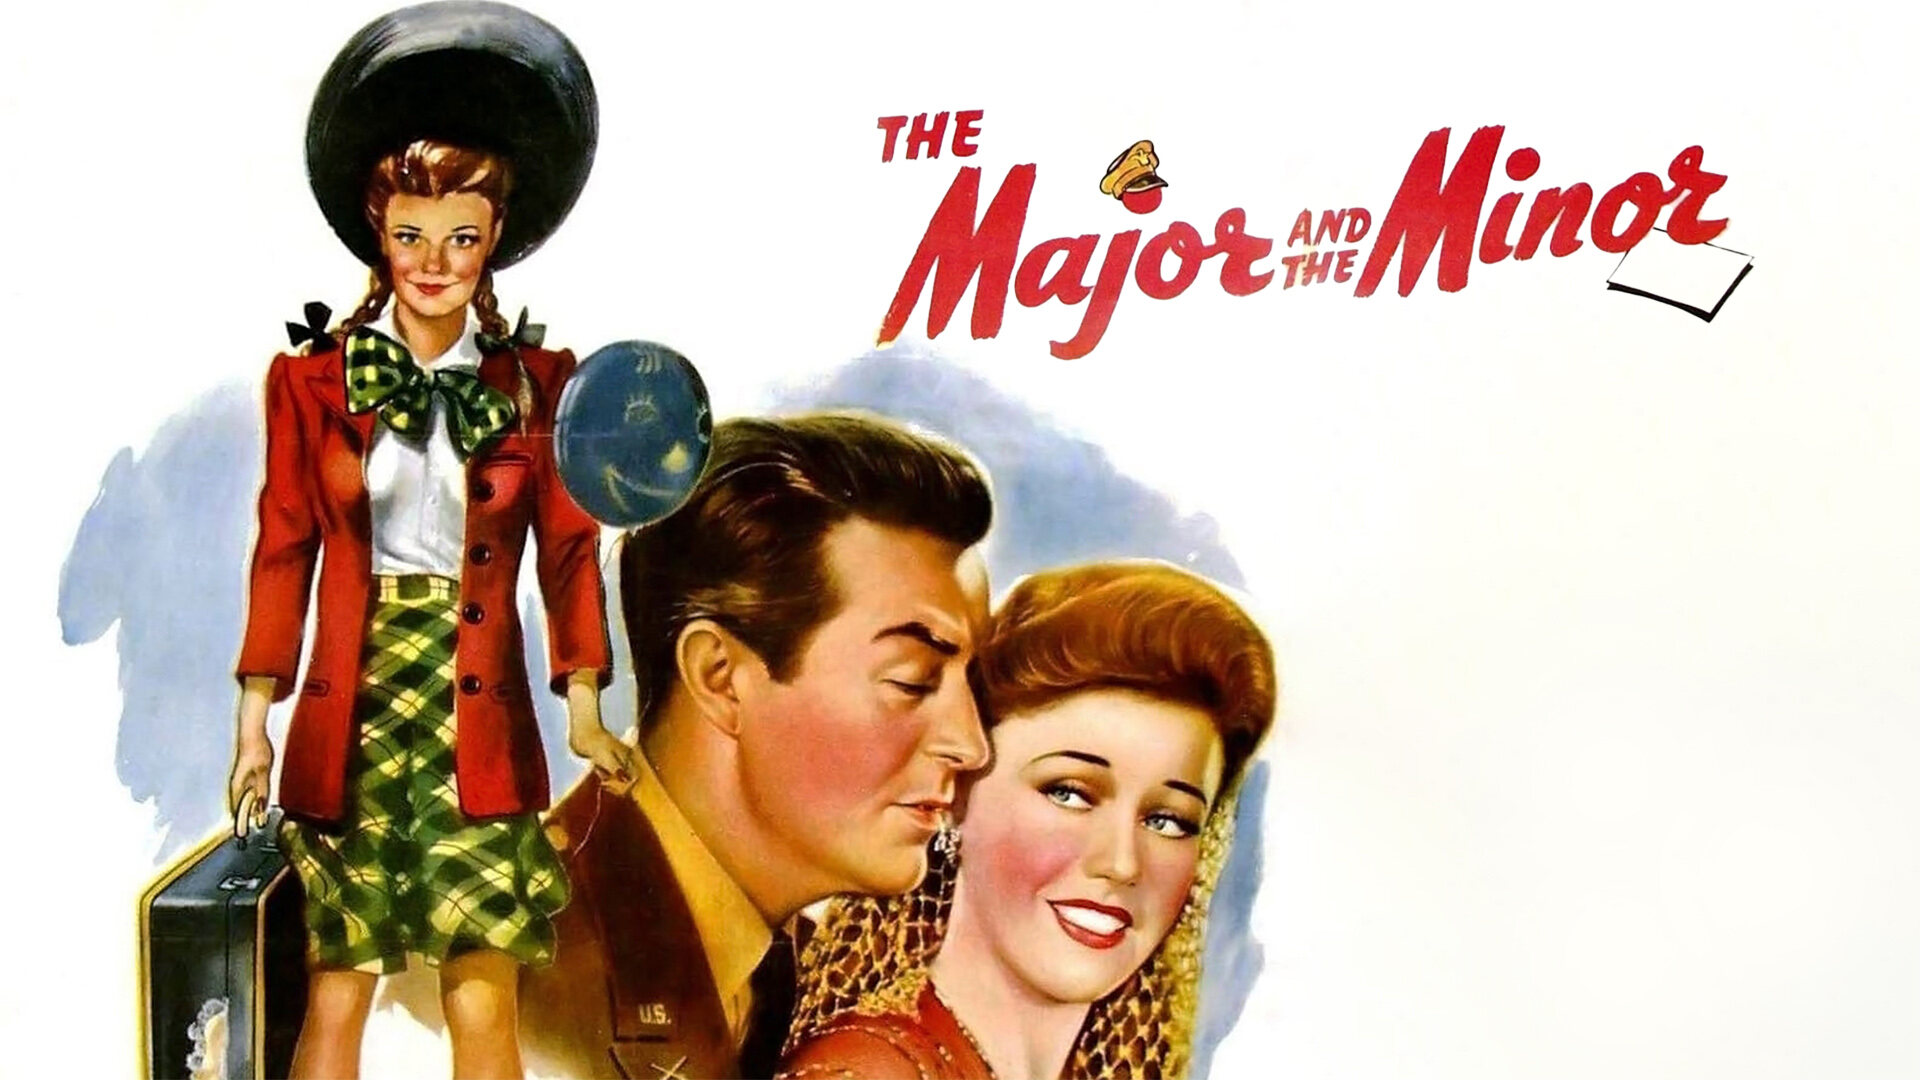 45-facts-about-the-movie-the-major-and-the-minor